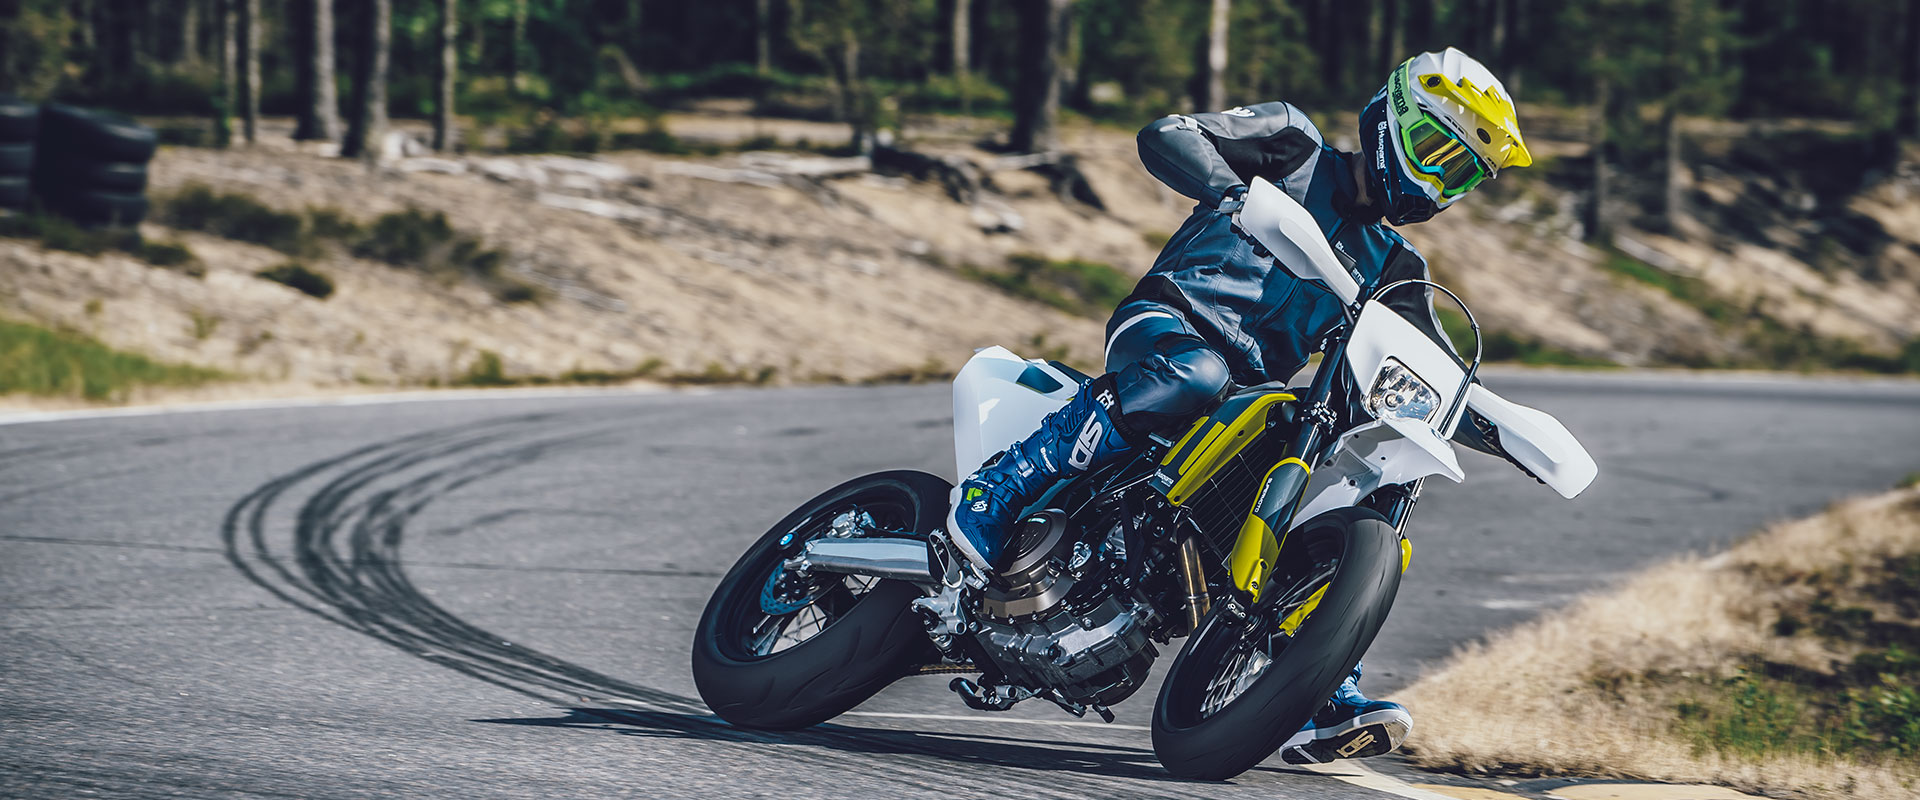 An image of a rider backing into a corner on the Husqvarna 701 Supermoto